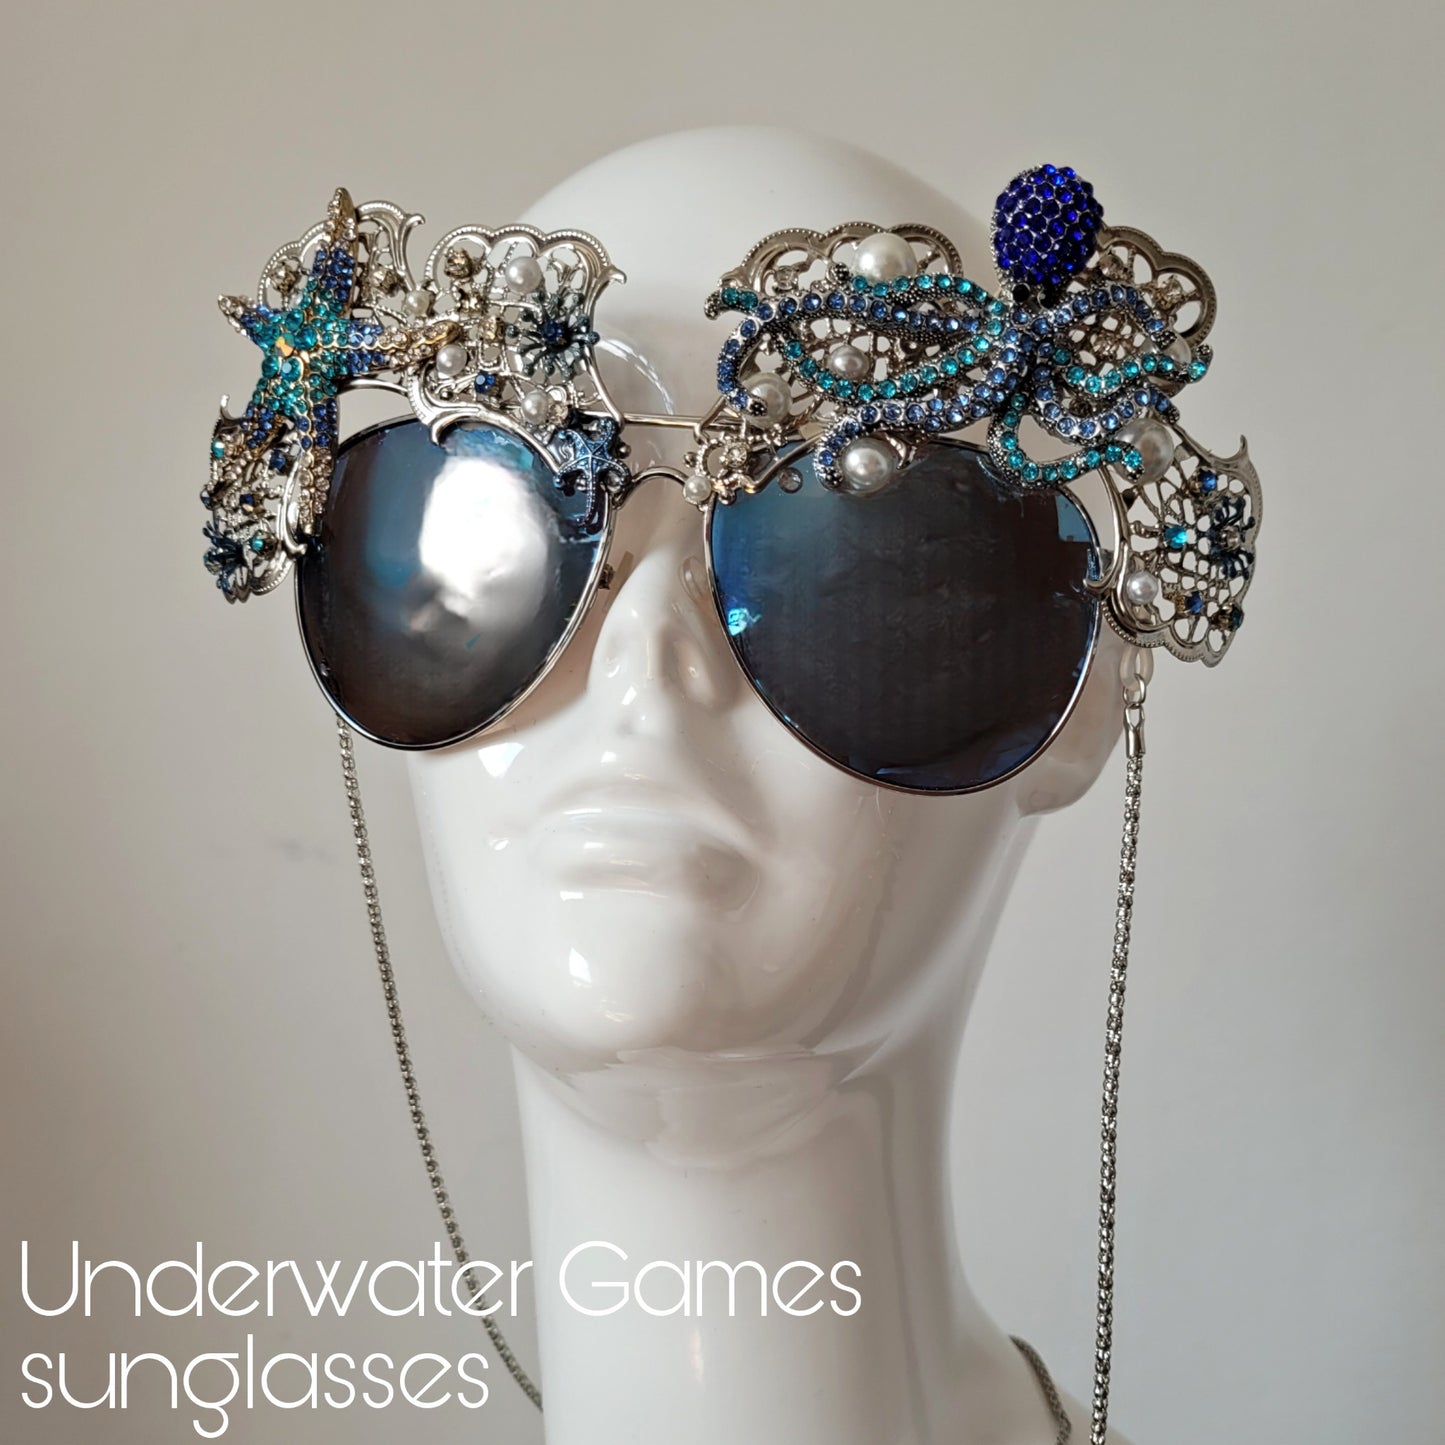 Shifting Depths collection: the Underwater Games showpiece sunglasses